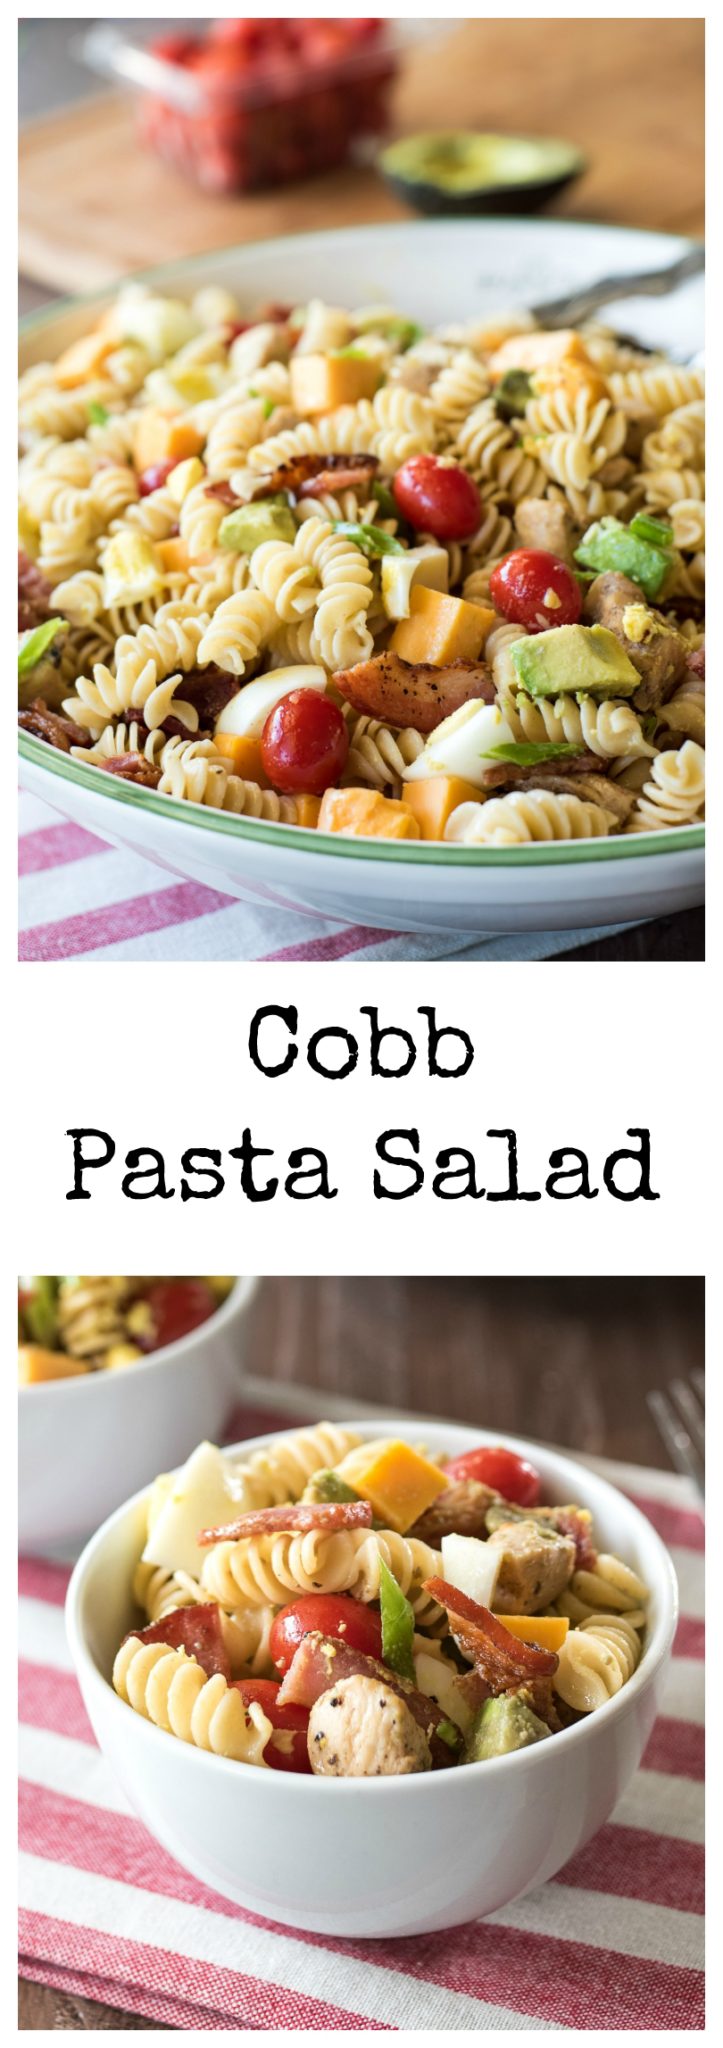 Cobb Pasta Salad- traditional Cobb Salad meets pasta in this kid-friendly, one dish meal. Easily made #glutenfree with gluten free pasta!